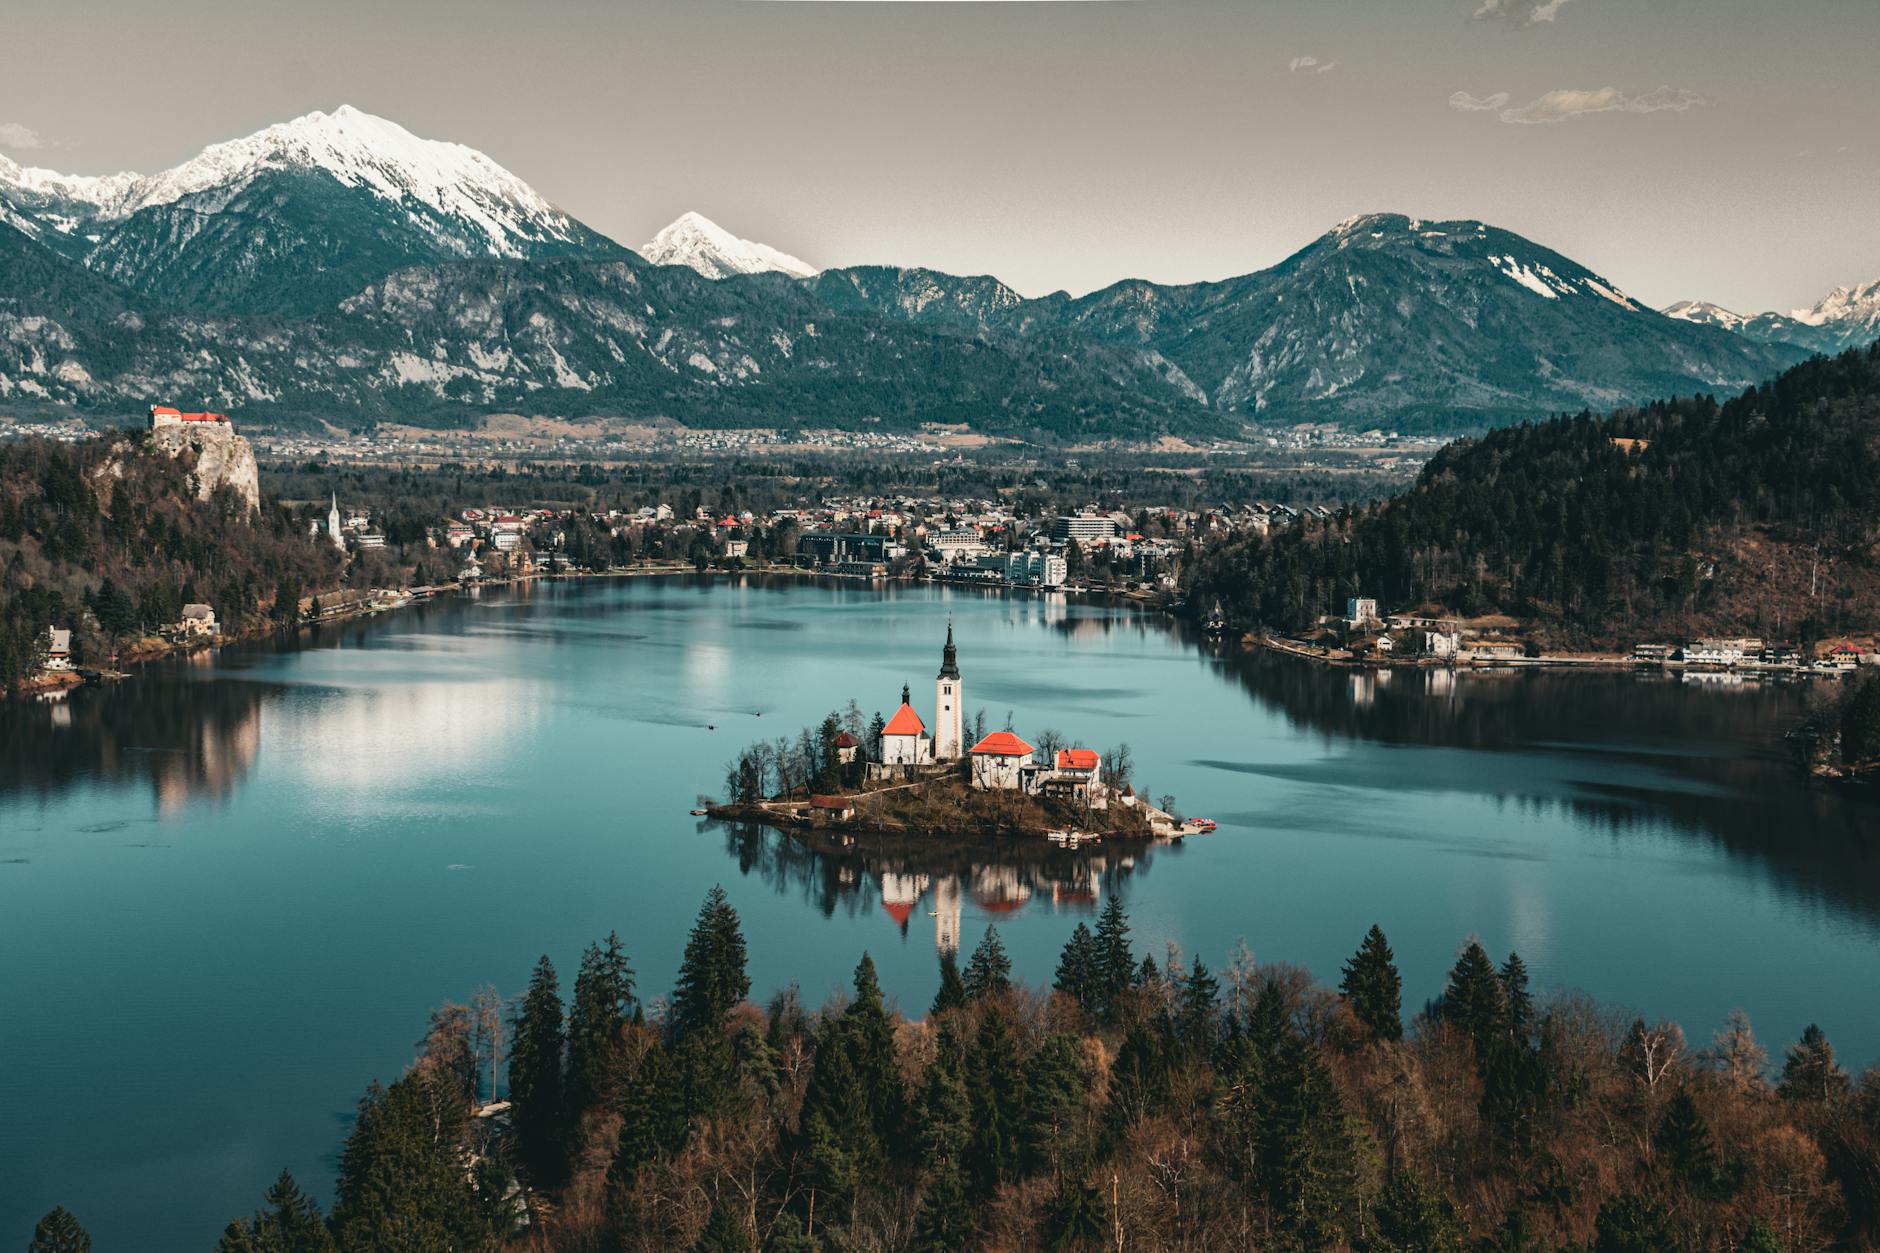 Lake and Town of Bled Surrounded by the Alps